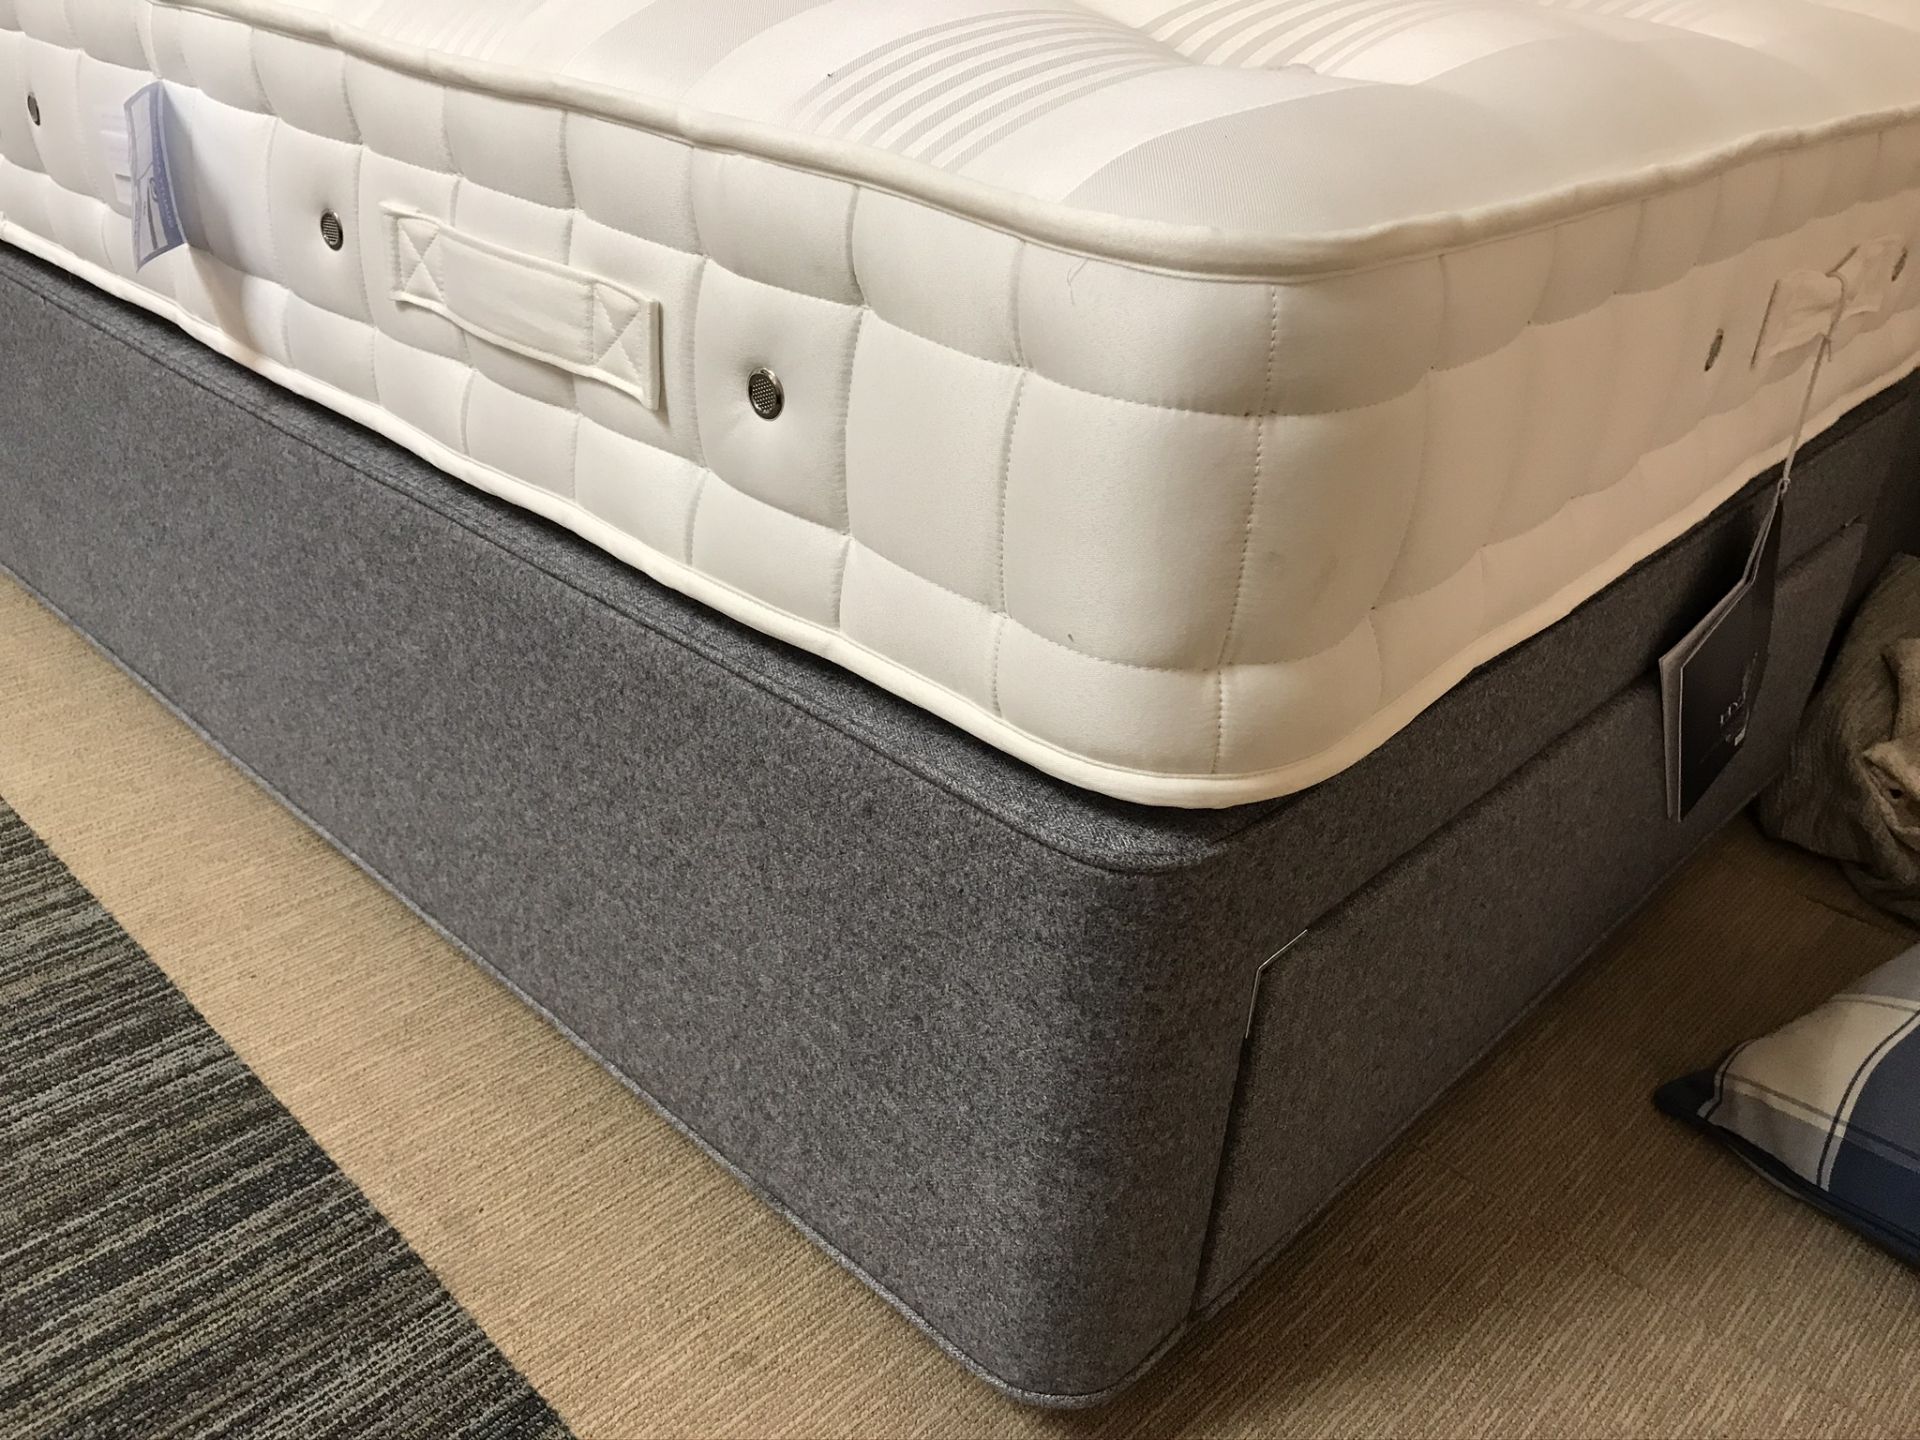 Ex Display Hypnos Orthocare 10 King Size Mattress w/ 2 Drawer Bed Frame & Euro Slim Headboard in Twe - Image 3 of 5